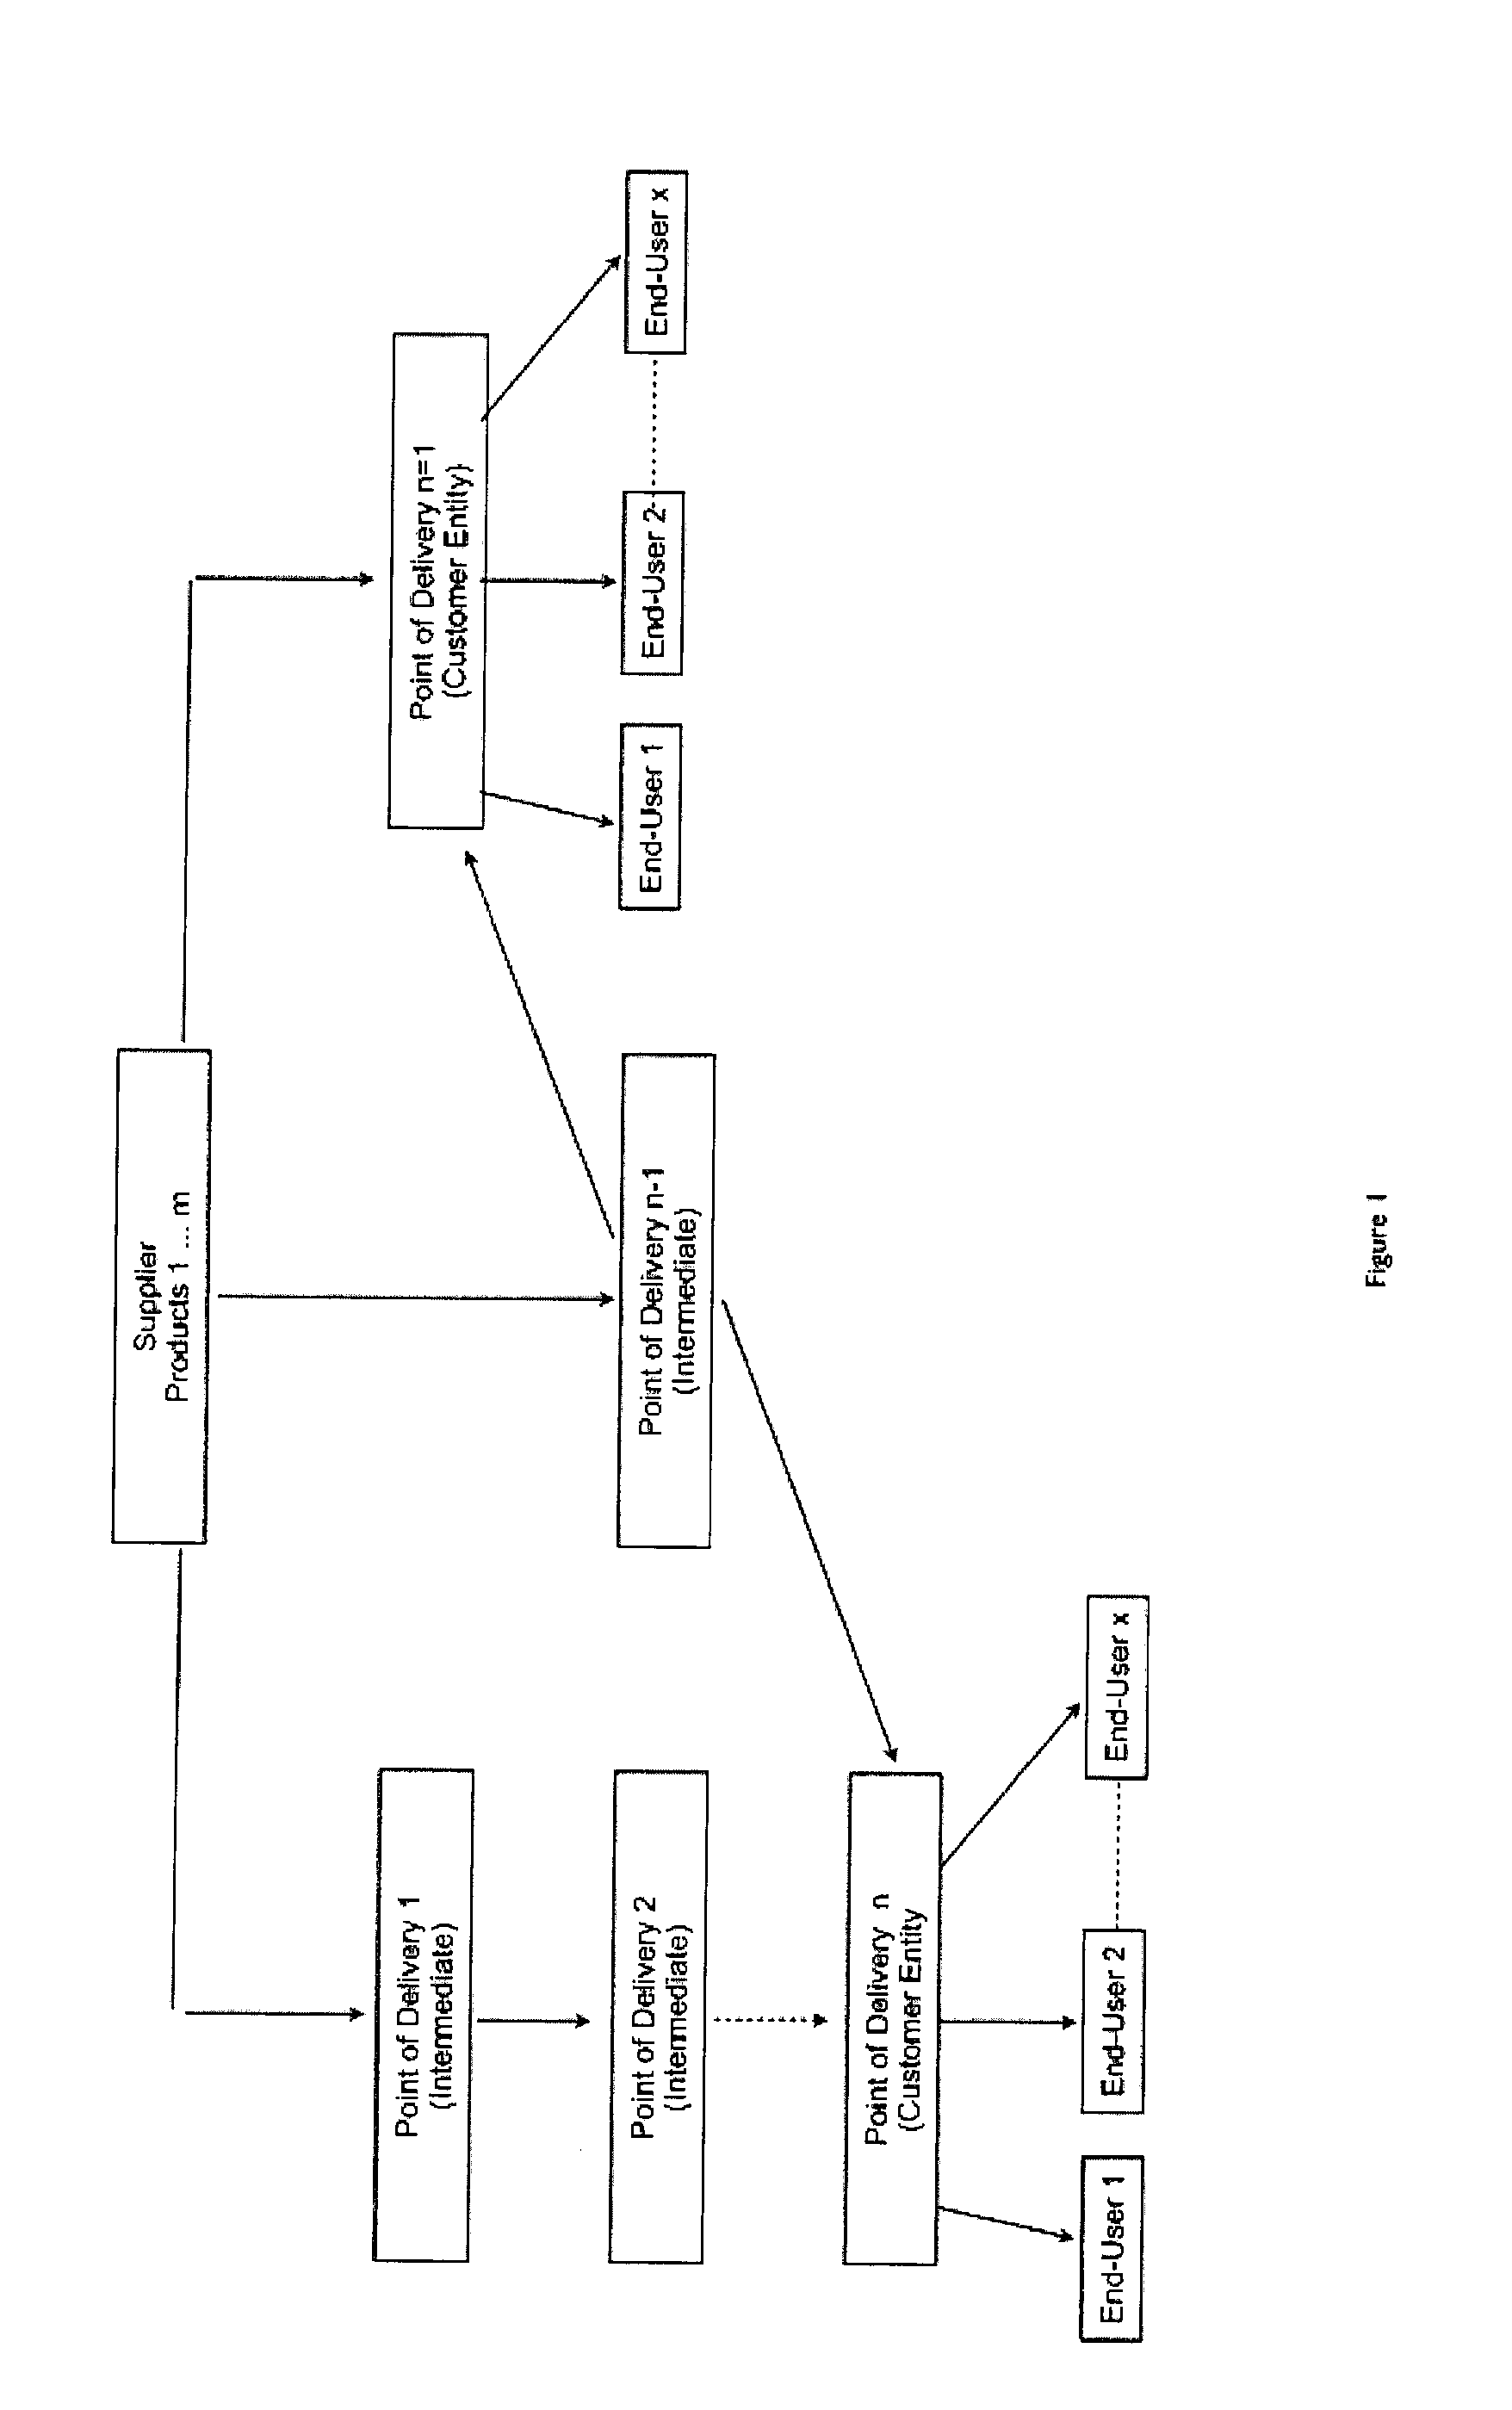 System and Method for Determining the Use or Consumption of Tangible Prodcuts and for Delivery According to Use or Consumption